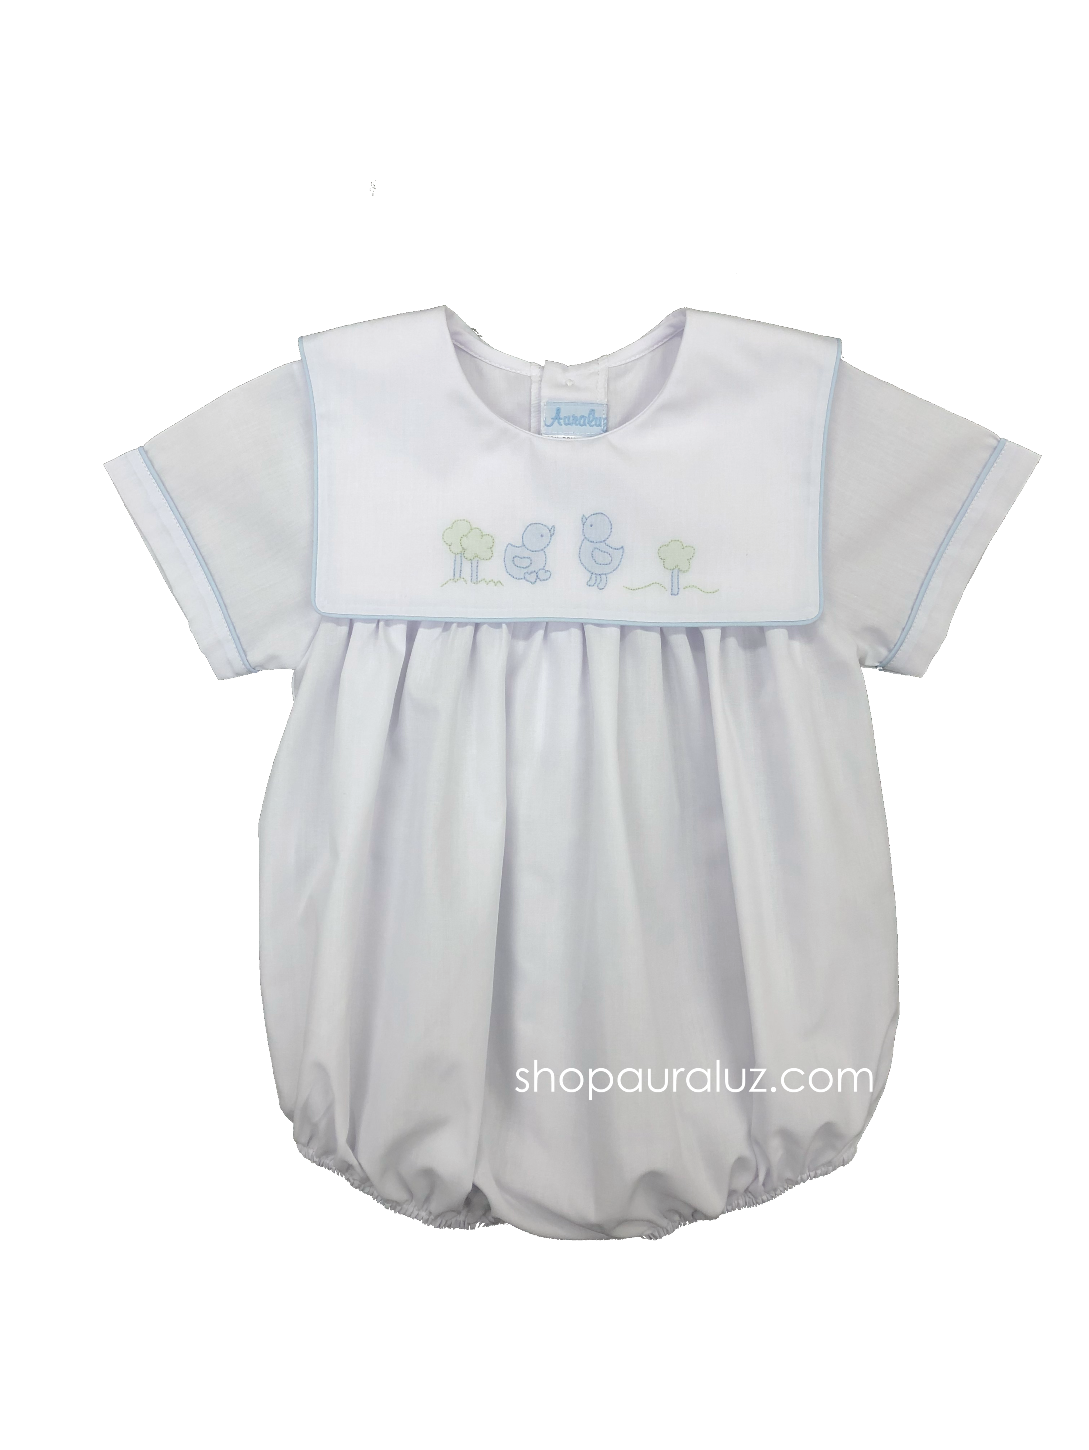 Auraluz Boy Bubble..White with blue binding trim and embroidered chicks